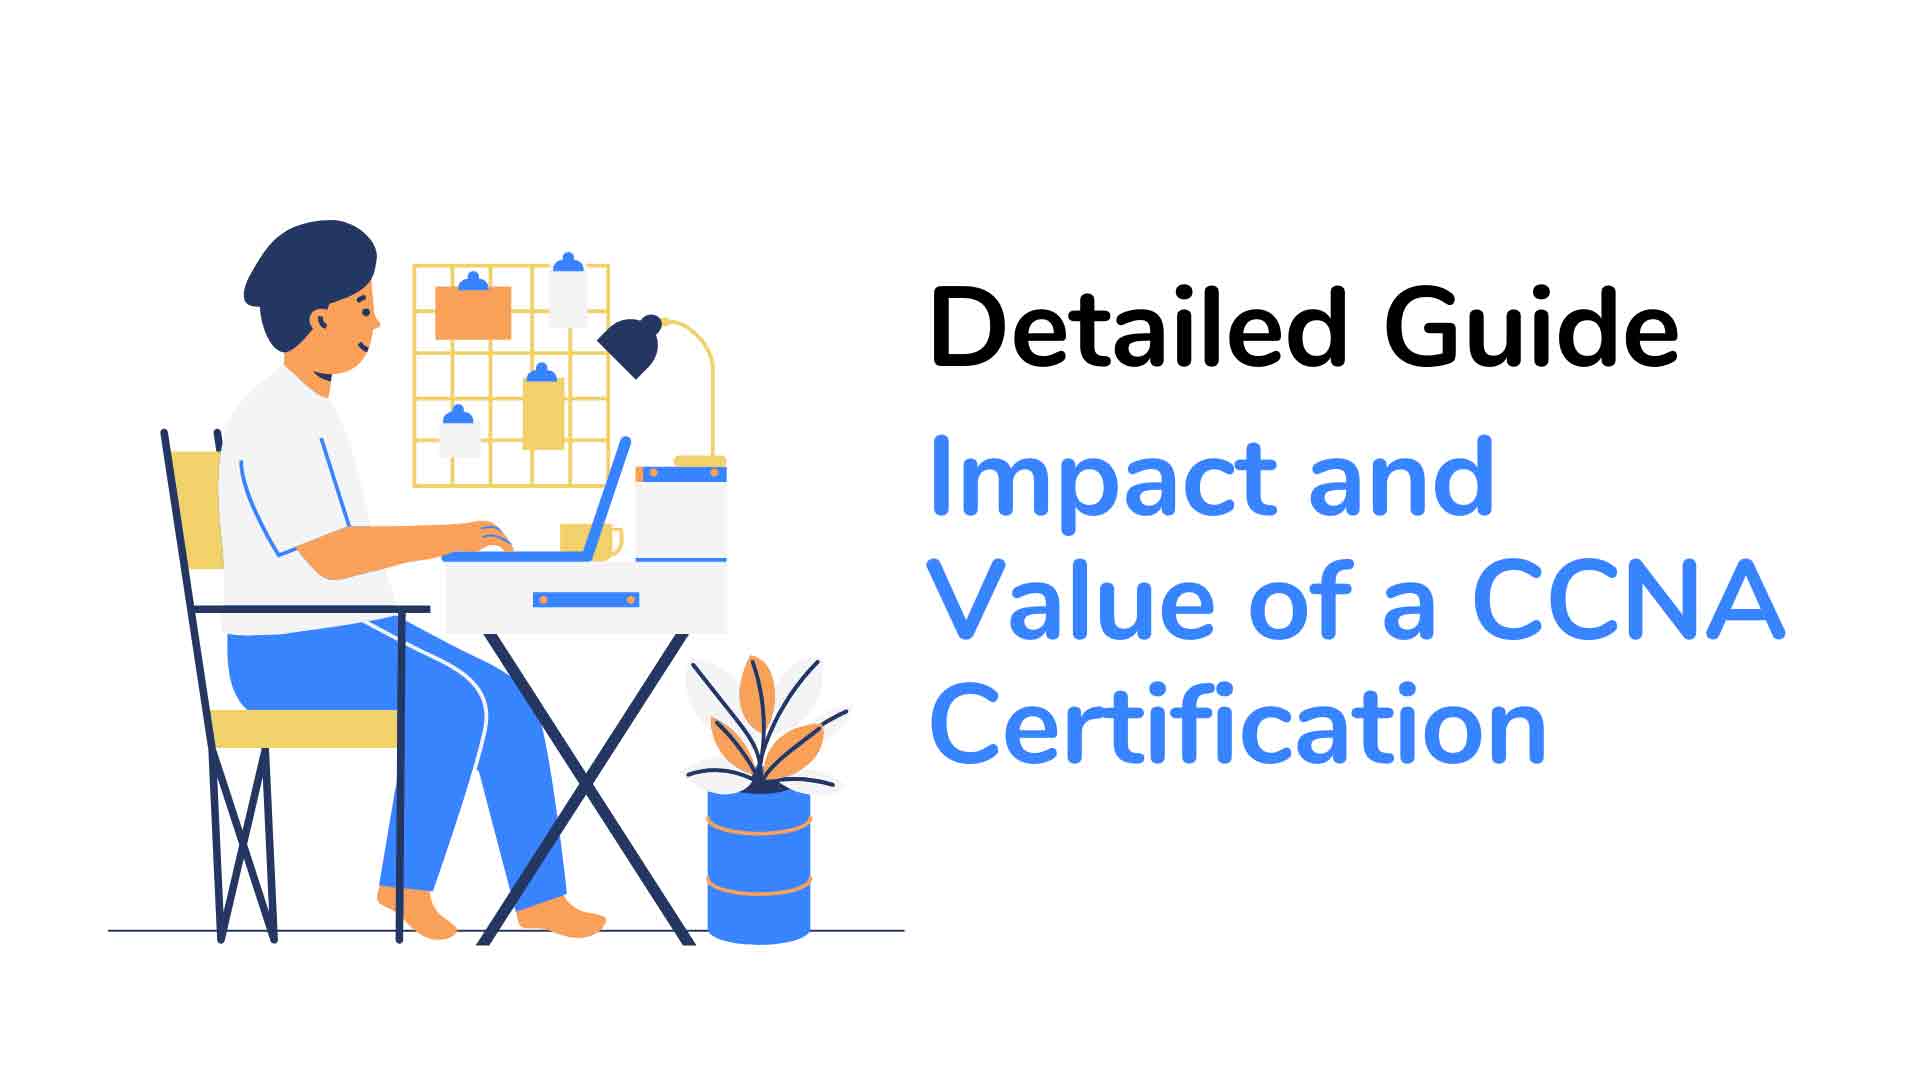 Impact and Value of a CCNA Certification: A Detailed Guide